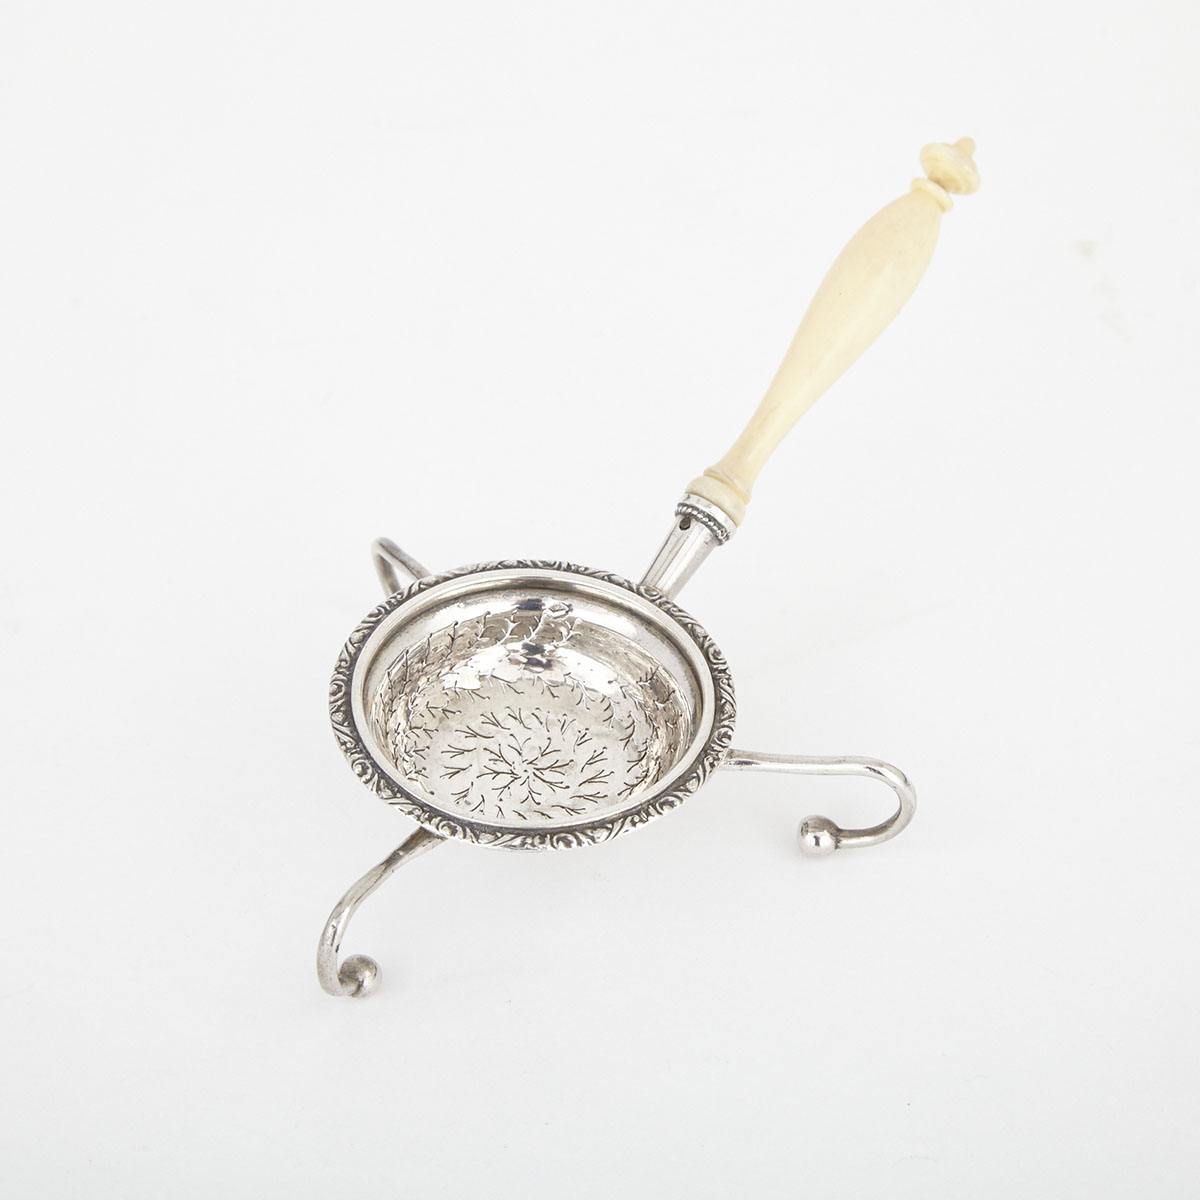 French Silver Tea Strainer, c.1900